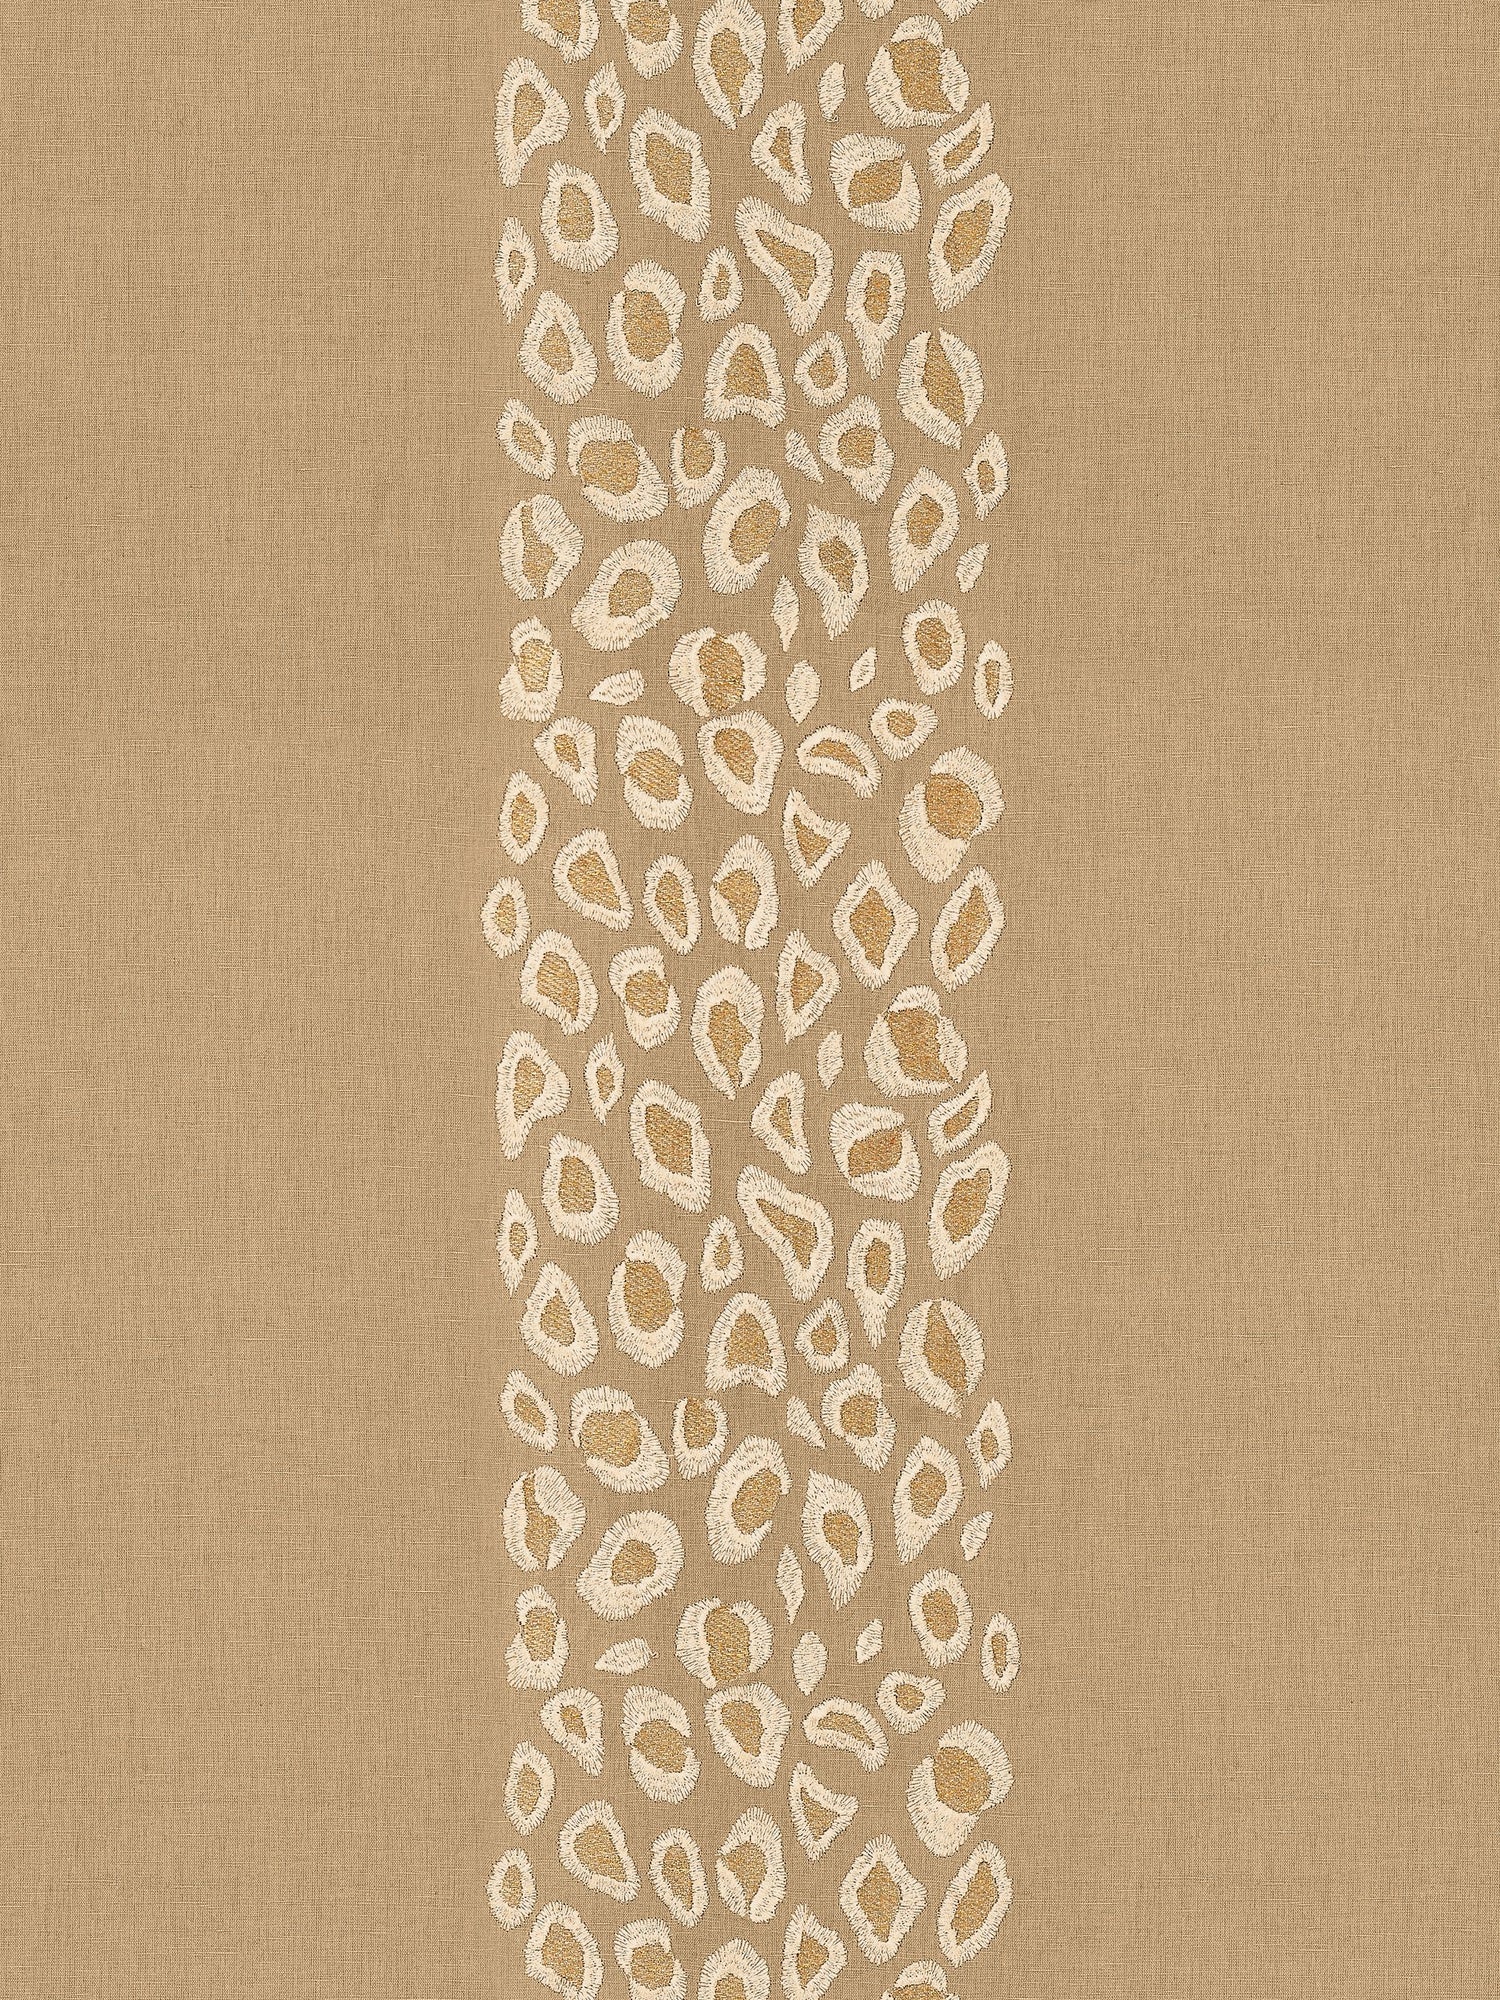 Catwalk Embroidery fabric in desert color - pattern number SC 000327255 - by Scalamandre in the Scalamandre Fabrics Book 1 collection